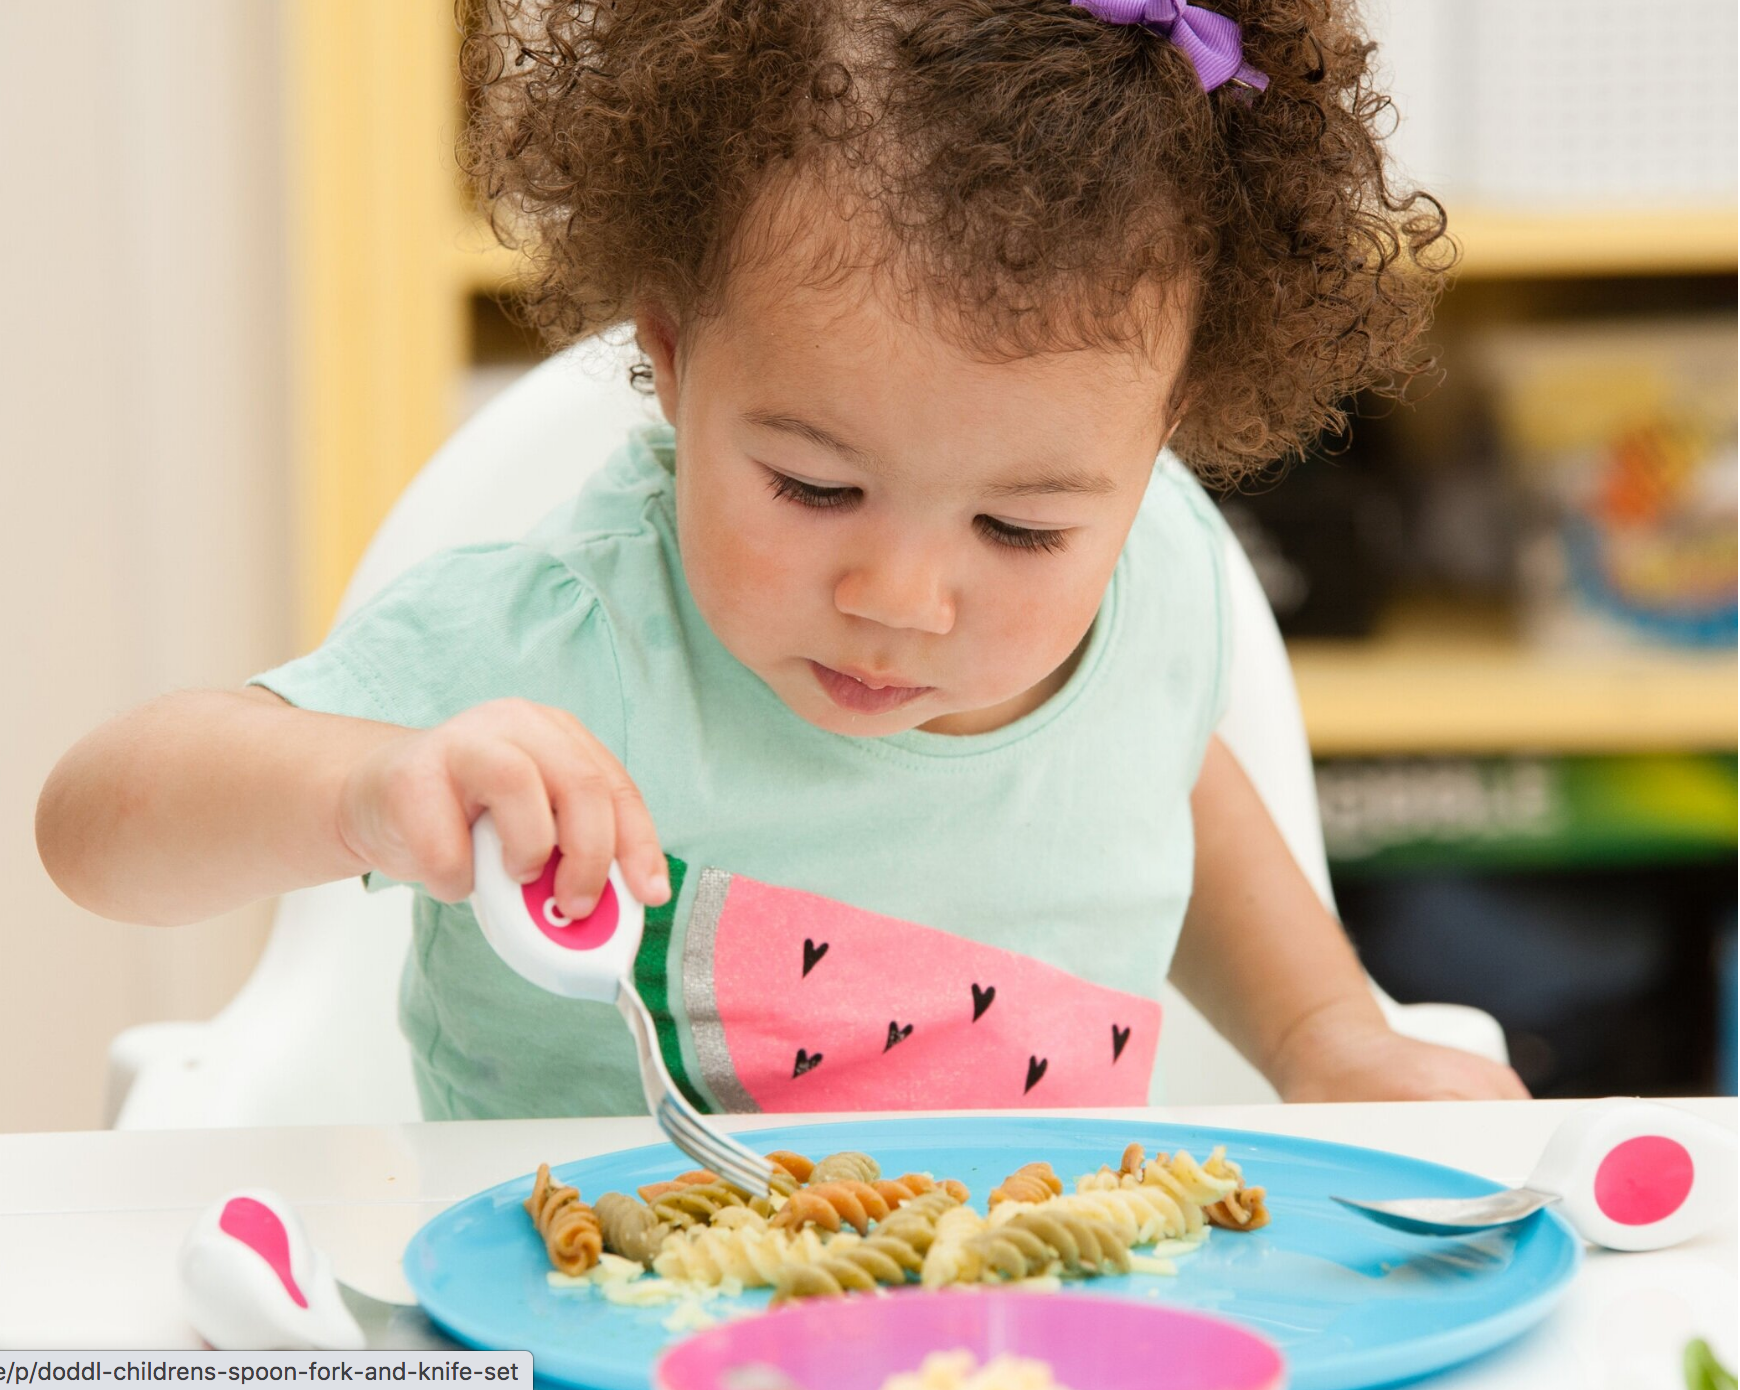 Hints and tips to get your little one set up for mealtime success